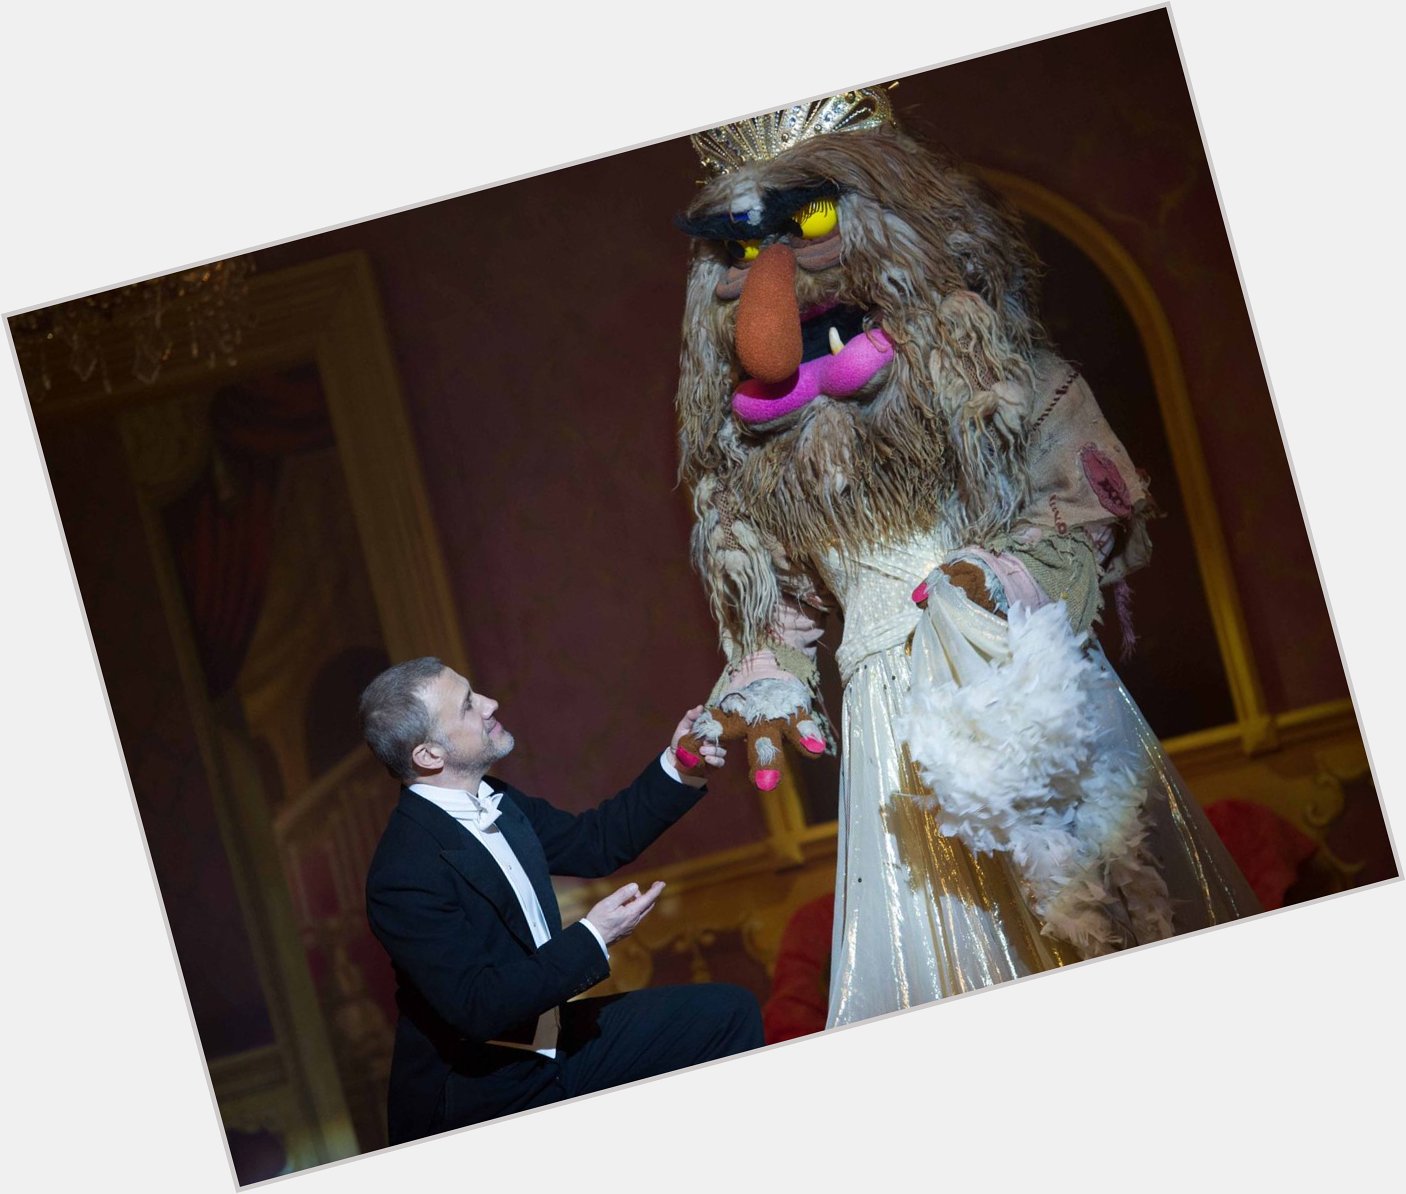 Happy Birthday, Christoph Waltz
For Disney, he made a cameo appearance in dancing with Sweetums. 